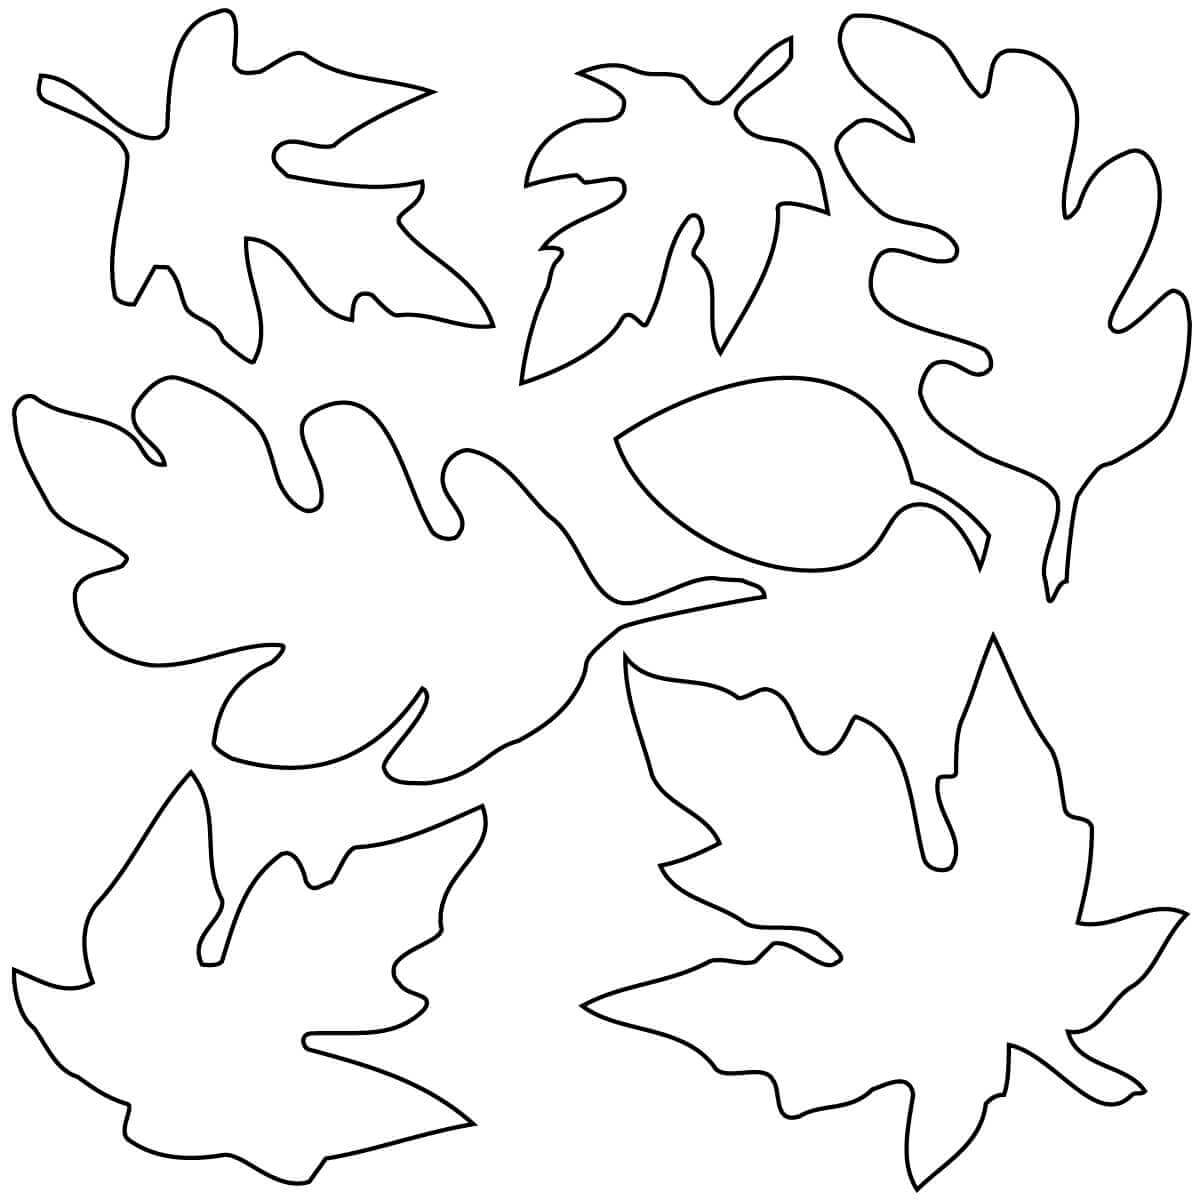 21-awesome-image-of-fall-leaves-coloring-pages-entitlementtrap